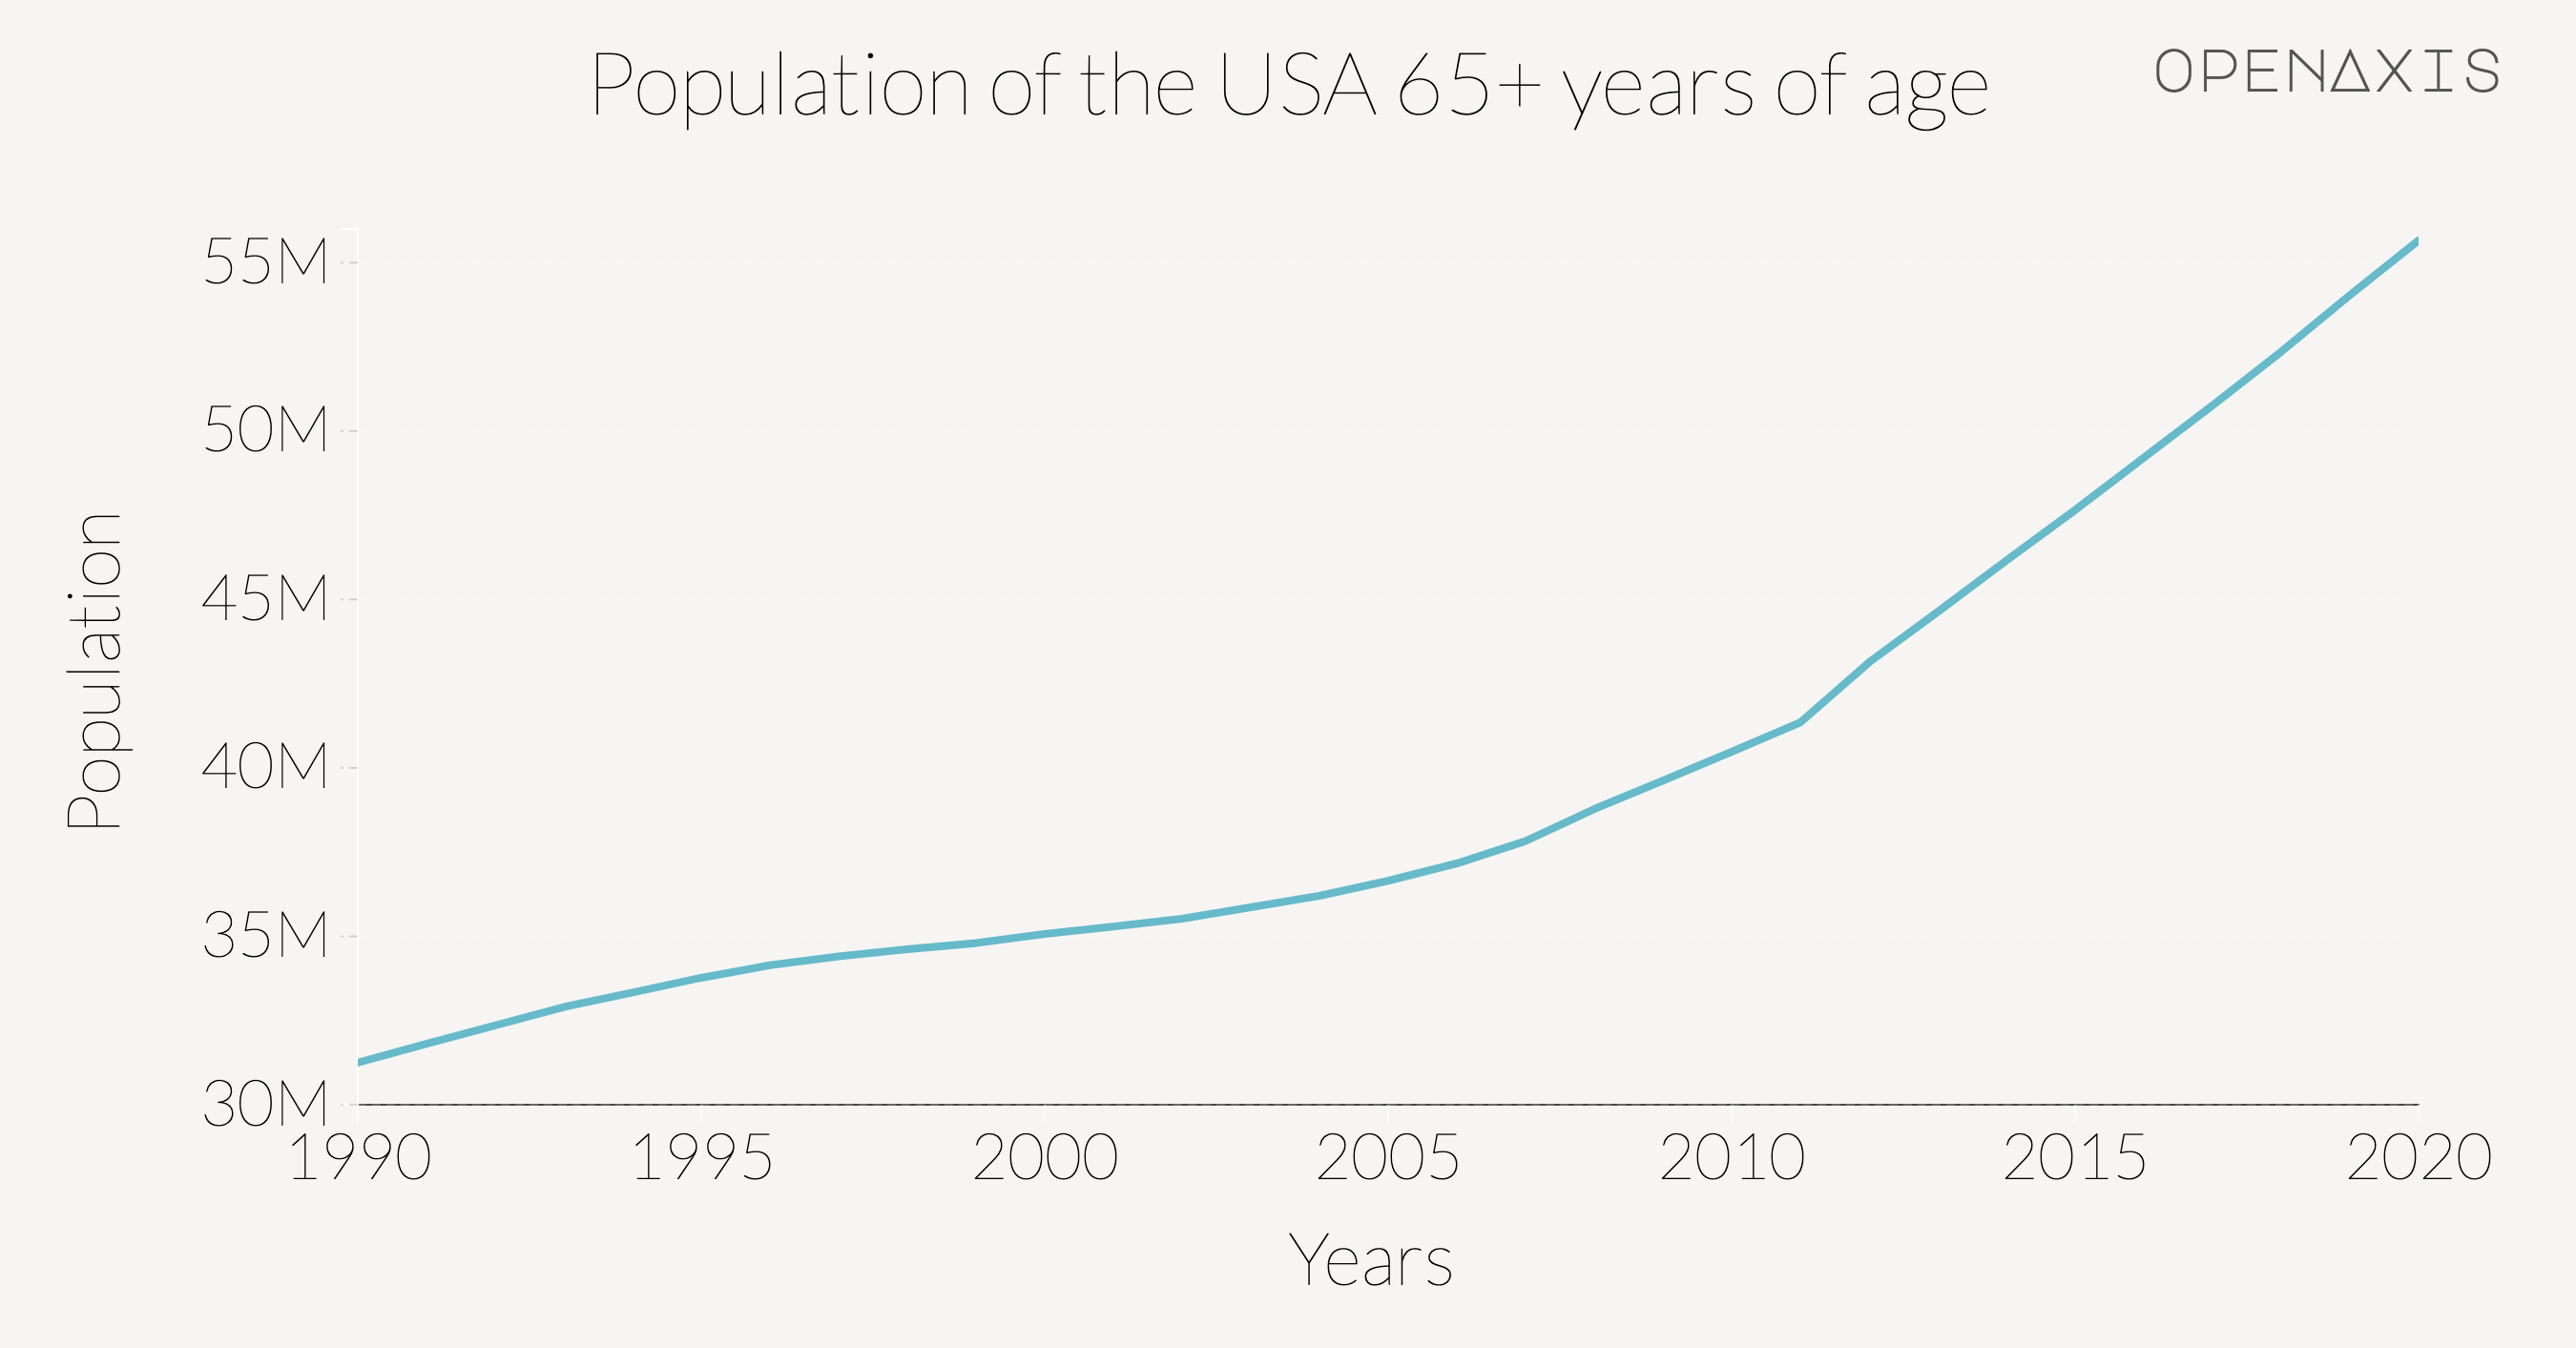 "Population of the USA 65+ years of age"